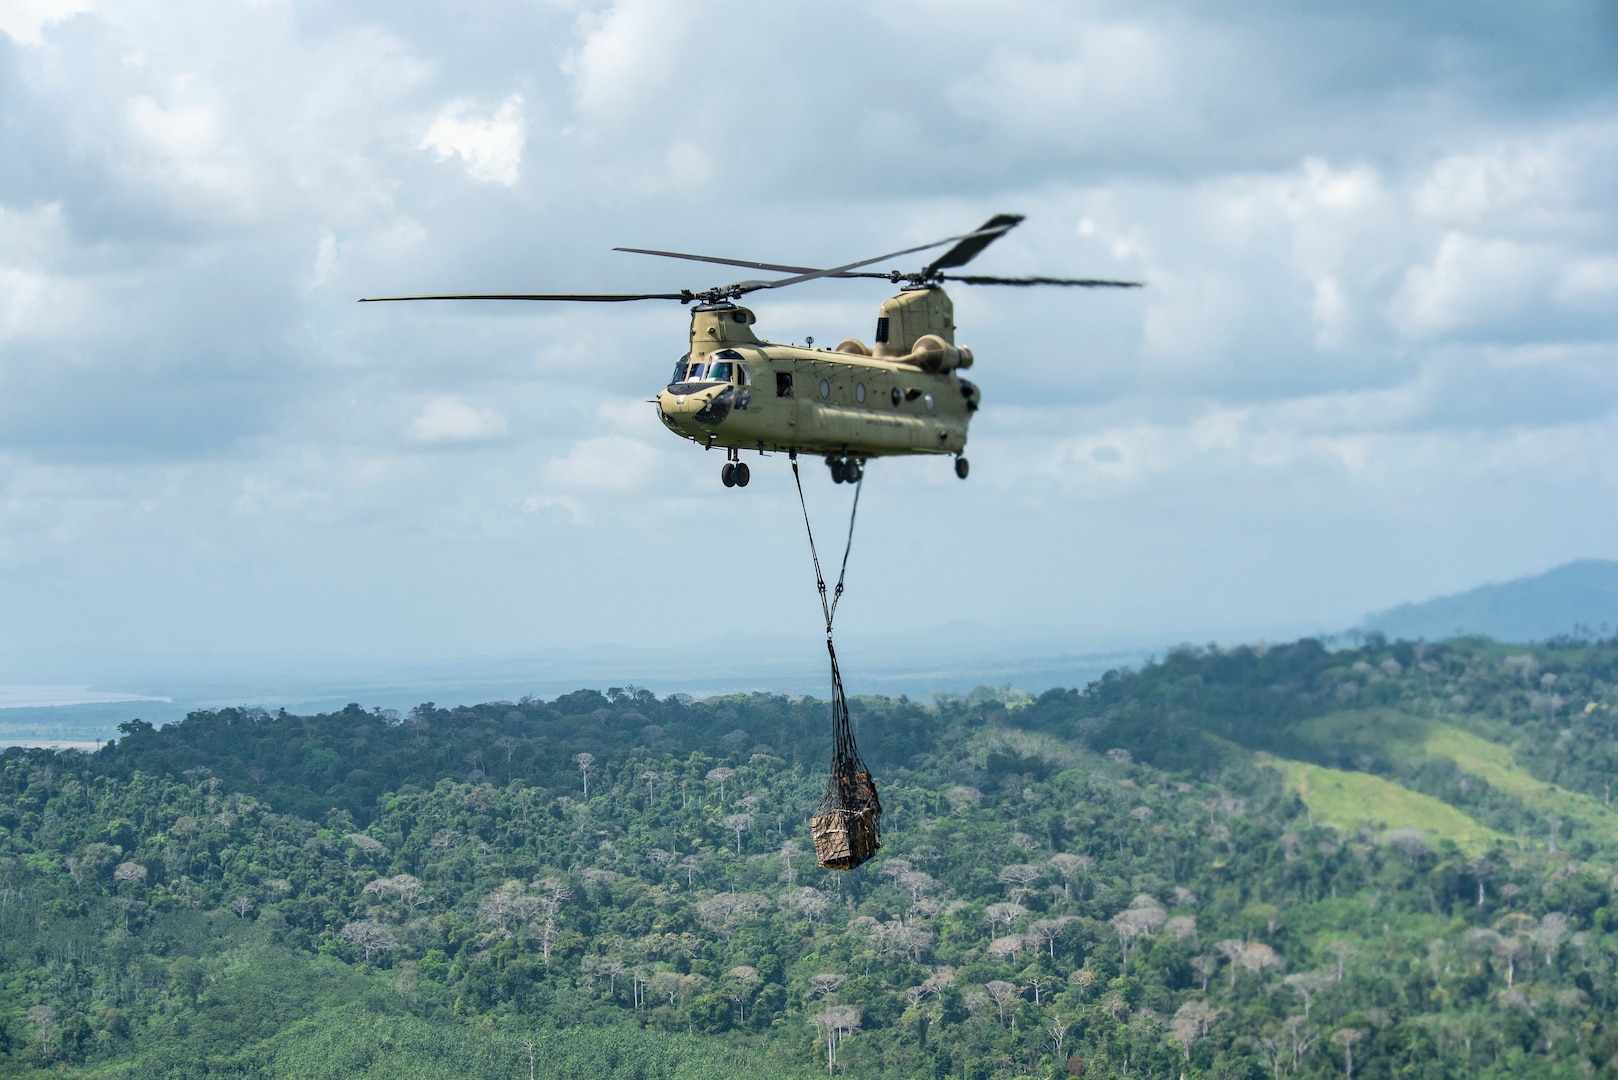 A U.S. Army CH-47 Chinook carries supplies to the Darien Province in the Republic of Panama, Jan. 9, 2019.